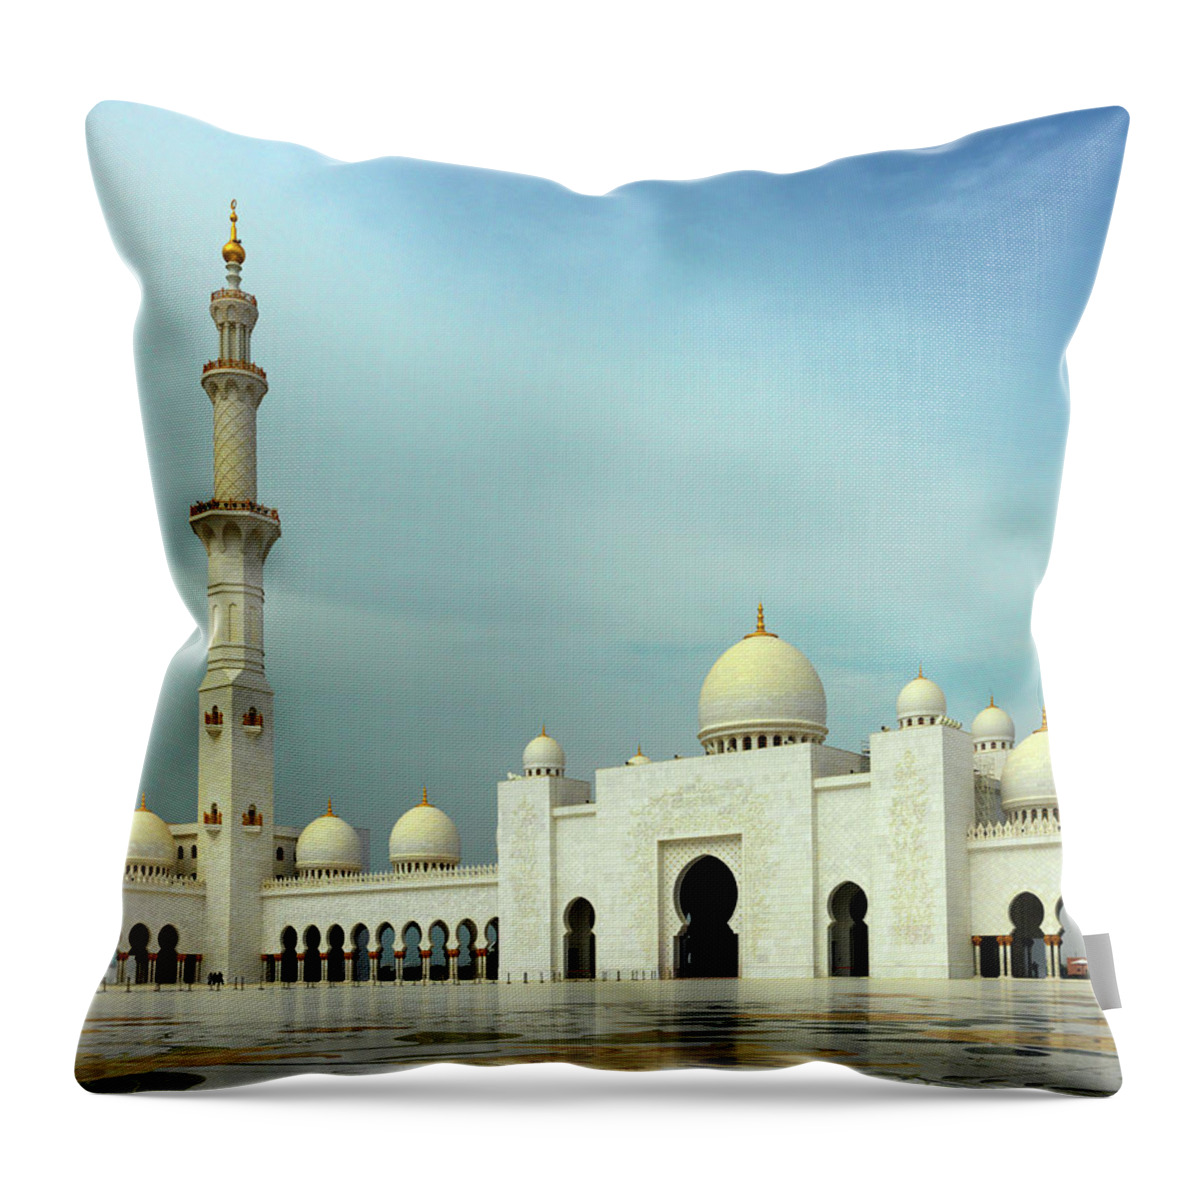 Tranquility Throw Pillow featuring the photograph Abu Dhabi, Sheikh Zayed Mosque by Buena Vista Images